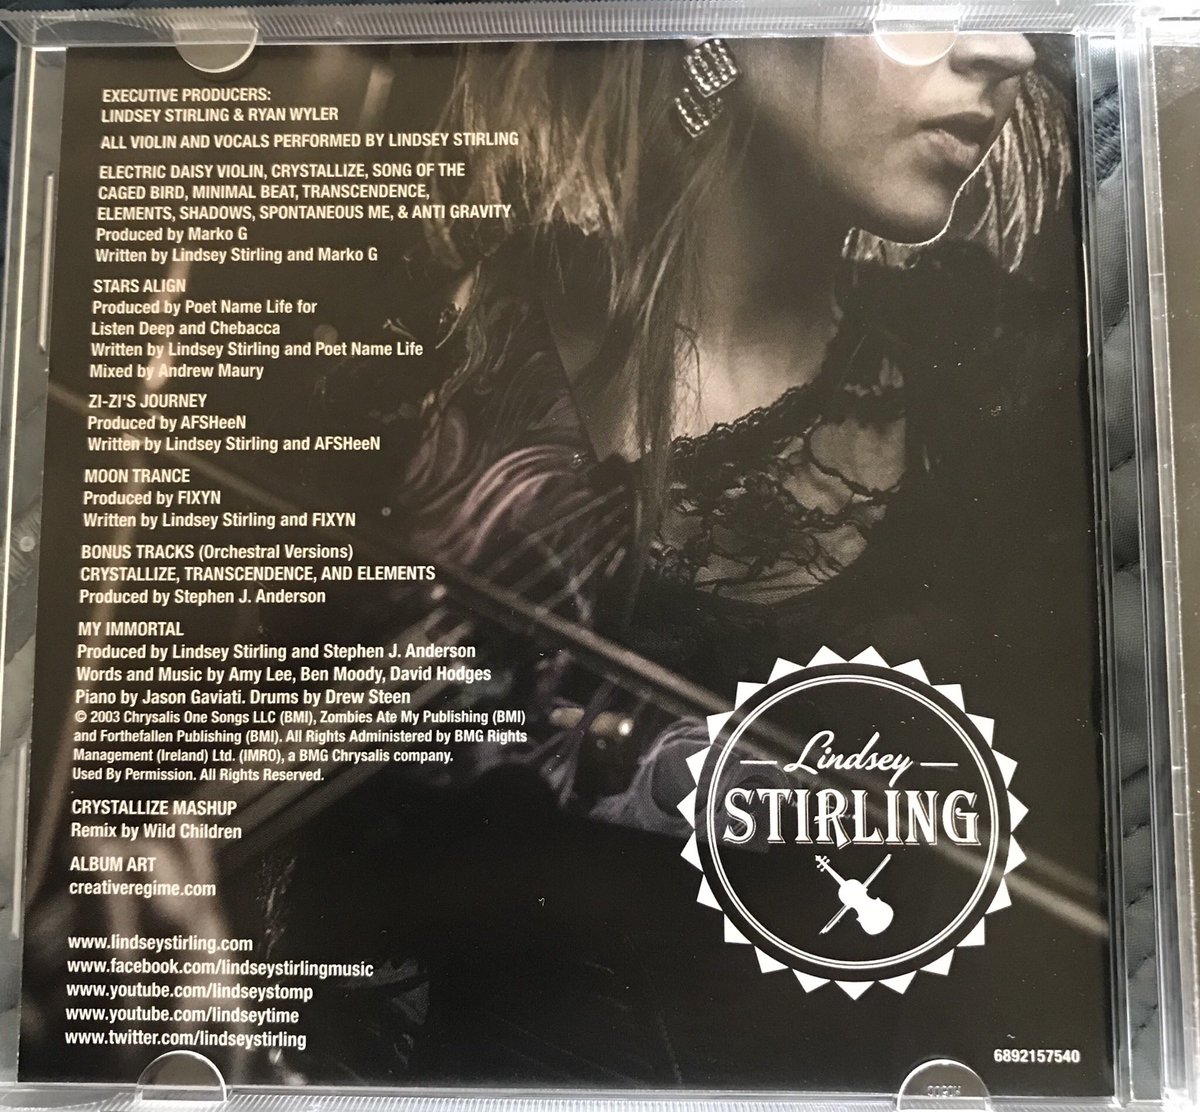 #5: Lindsey Sterling’s self titled album. I remember hearing her music for the first time. Love 